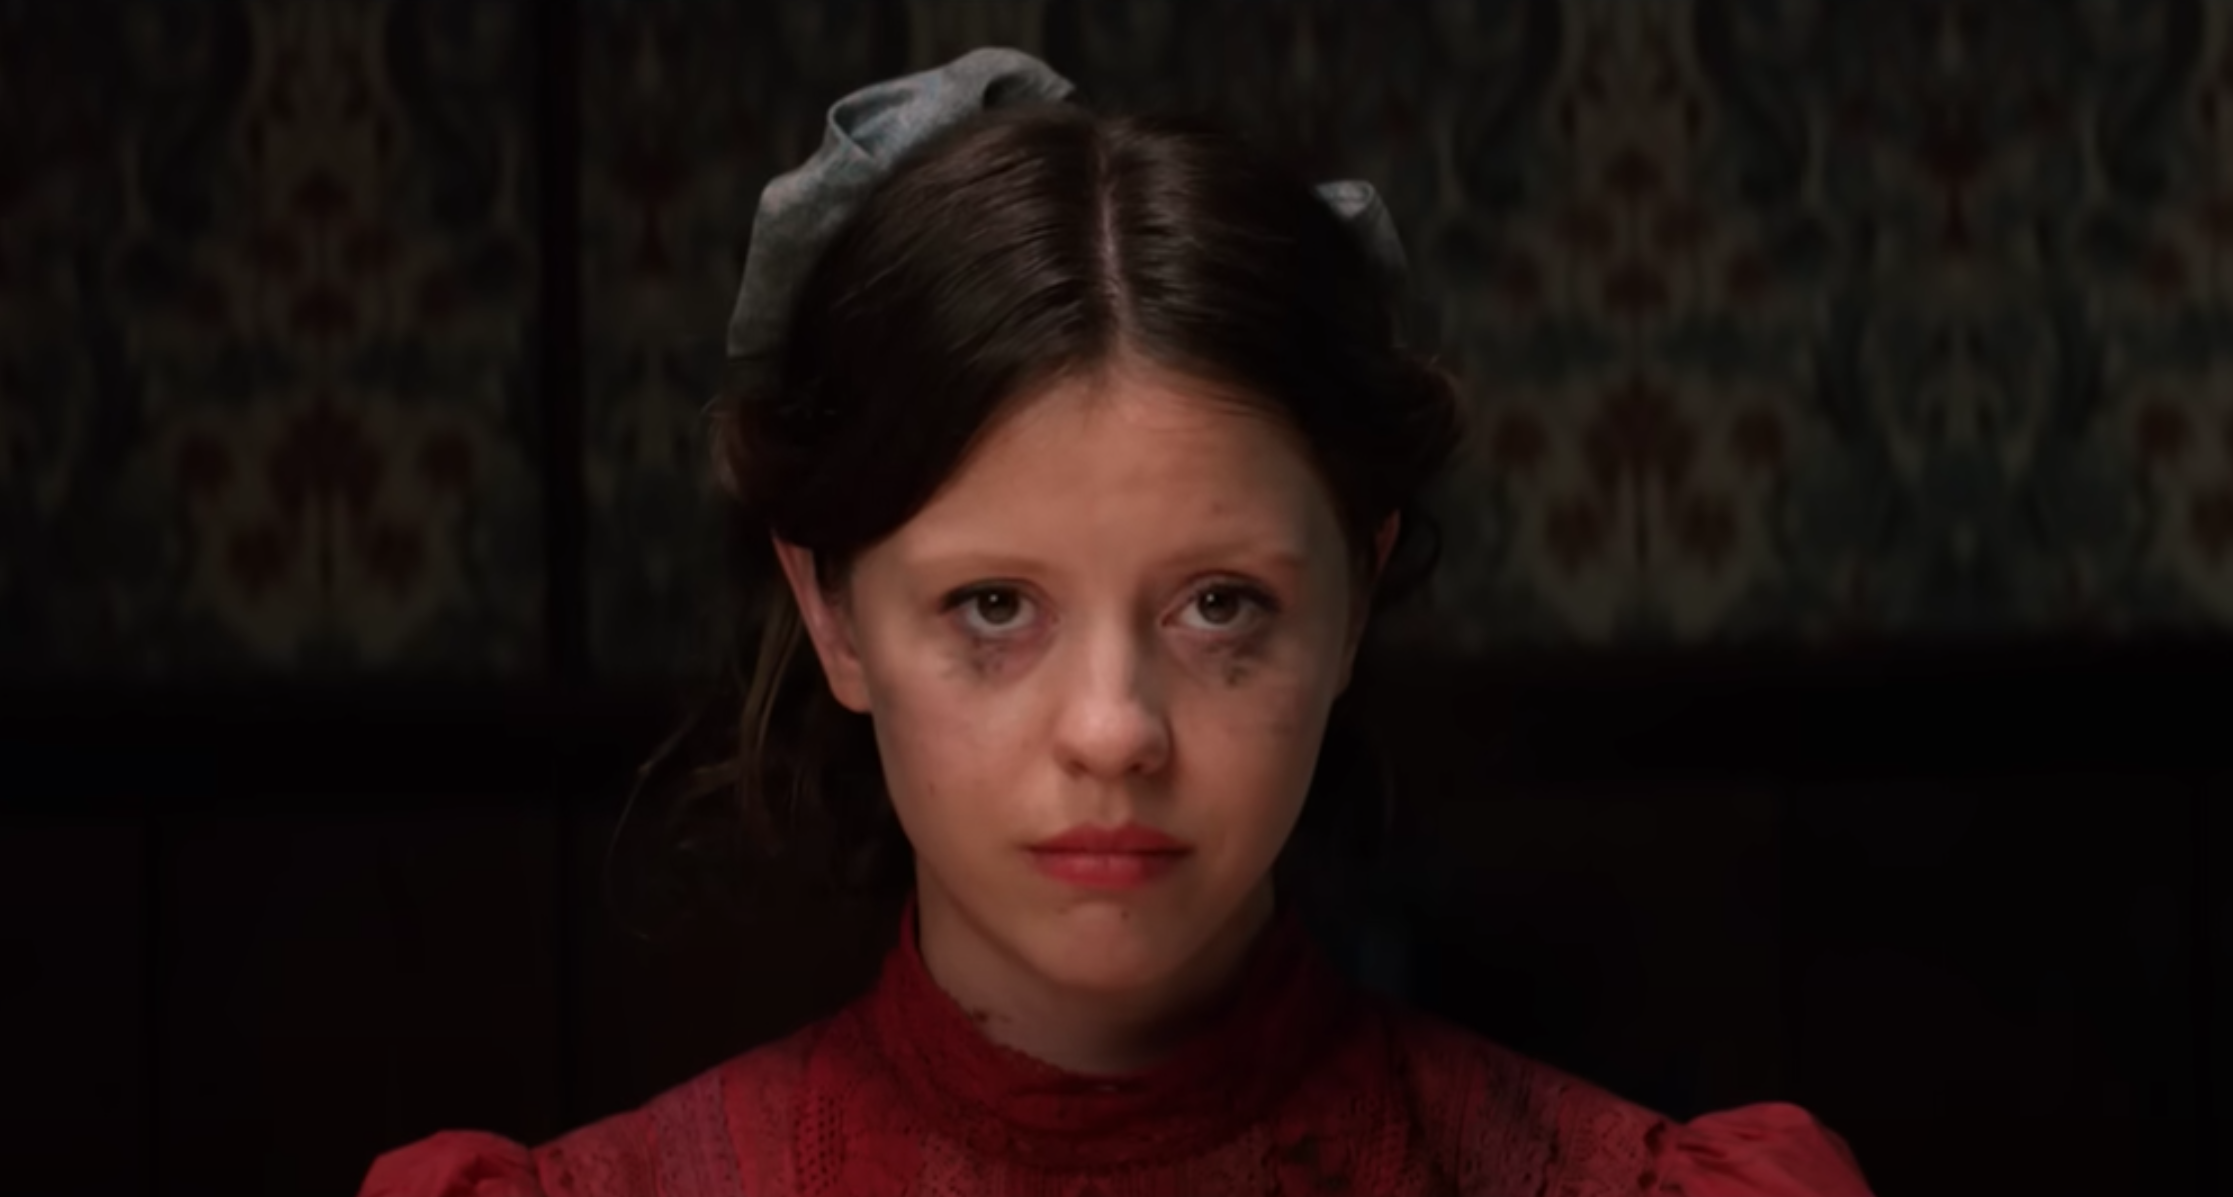 Trailer Watch: Mia Goth Will Stop at Nothing to Be a Star in “X” Prequel “Pearl”